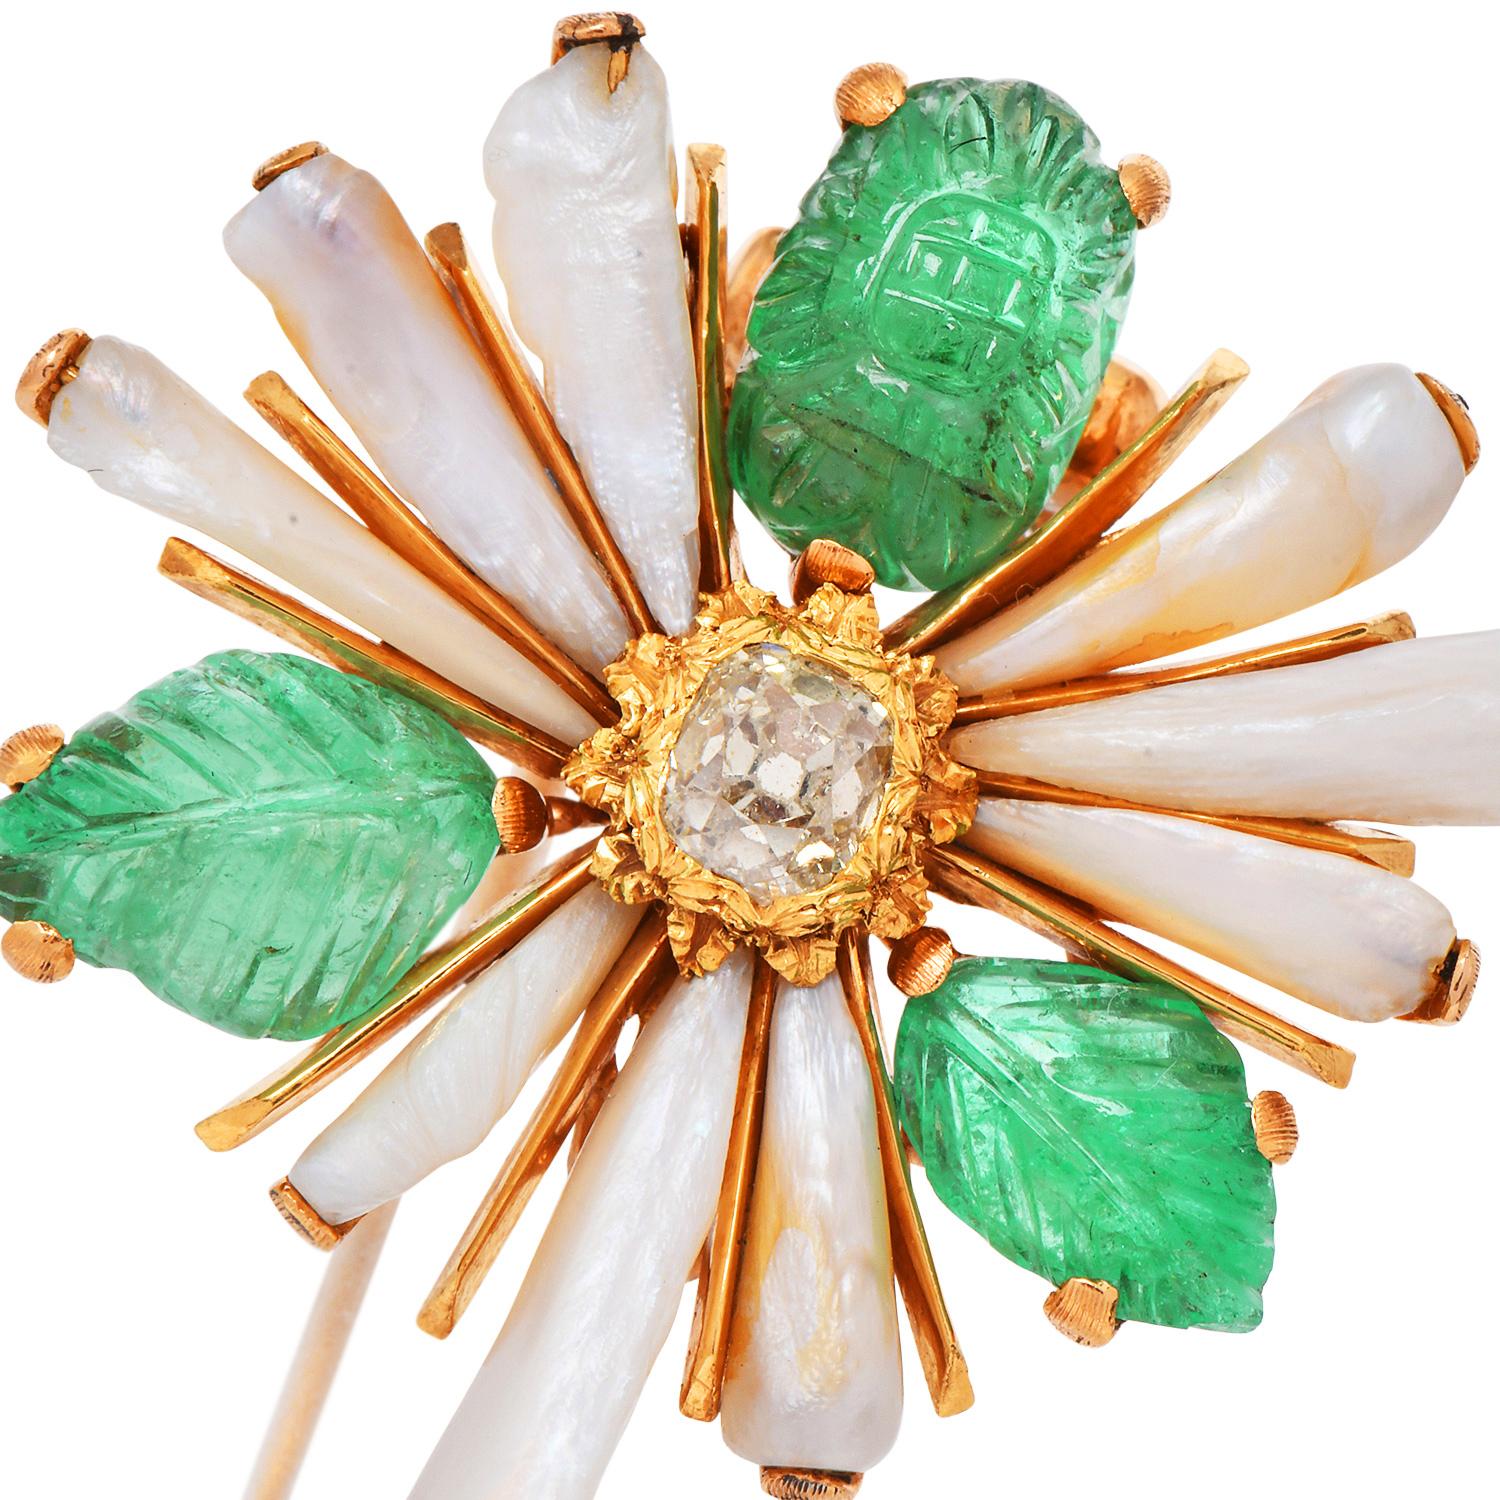 A charming Vintage piece from Buccellati,

Crafted in solid 18K Yellow Gold With its famous Rigato finish.
Centered by a natural fancy yellow old mine diamond weighing close to one carat,  and set with carved emeralds and freshwater pearls as leaves